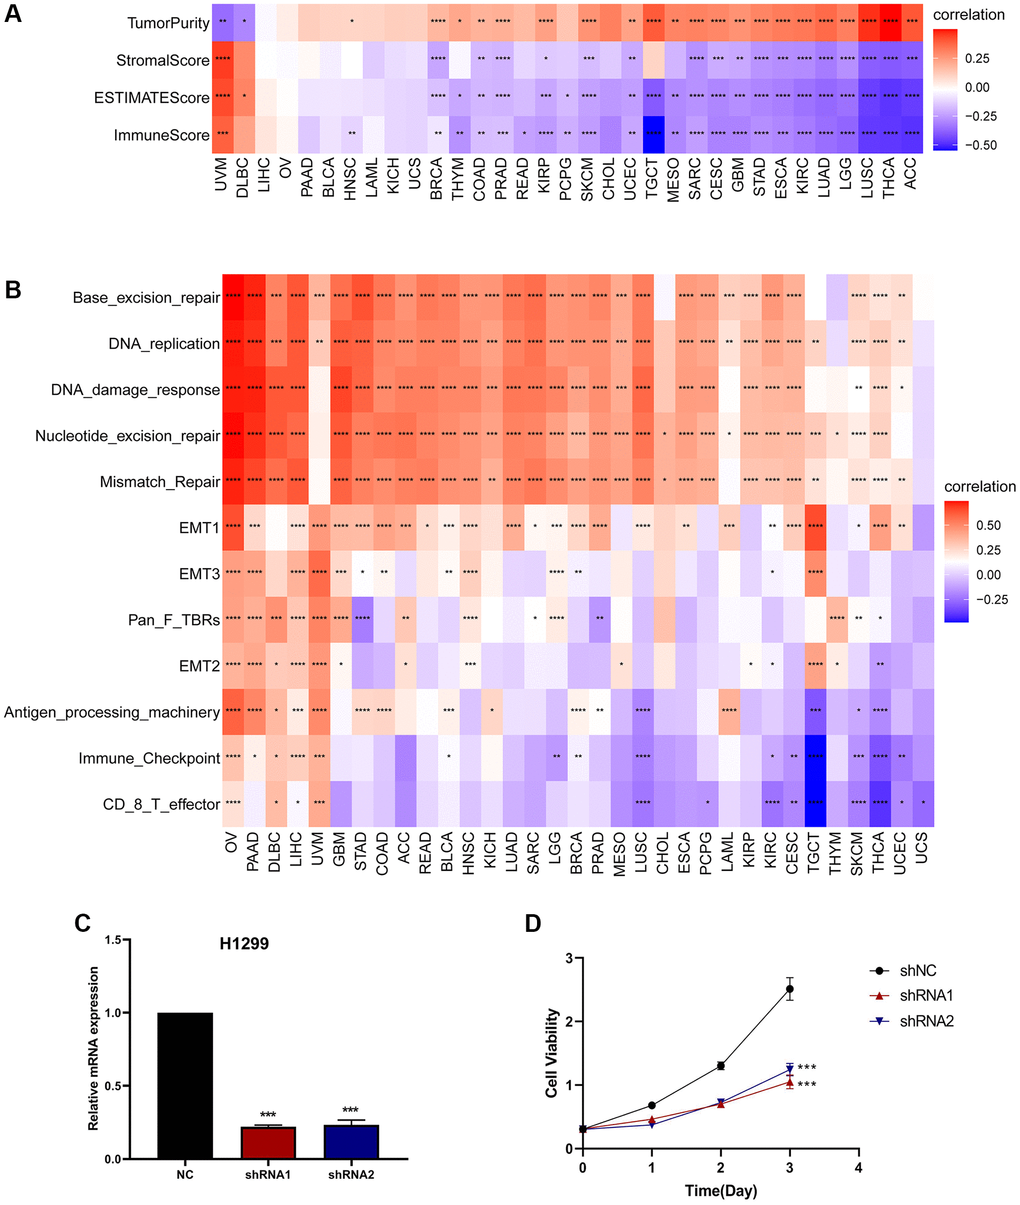 The relationship between CDK16 and the regulation of the tumour microenvironment. (A) Heatmap represents the correlation between CDK16 expression and TME scores in pan-cancer. (B) The relationship between CDK16 and the tumour microenvironment. (C) After H1299 cells were transfected with si-CDK16, the level of CDK16 was evaluated by qRT-PCR. (D) The cell viability of cells was examined by CCK-8 assay. Red represents positive correlation, blue represents negative correlation, and the darker the color, the stronger the correlation. *P **P ***P ****P 